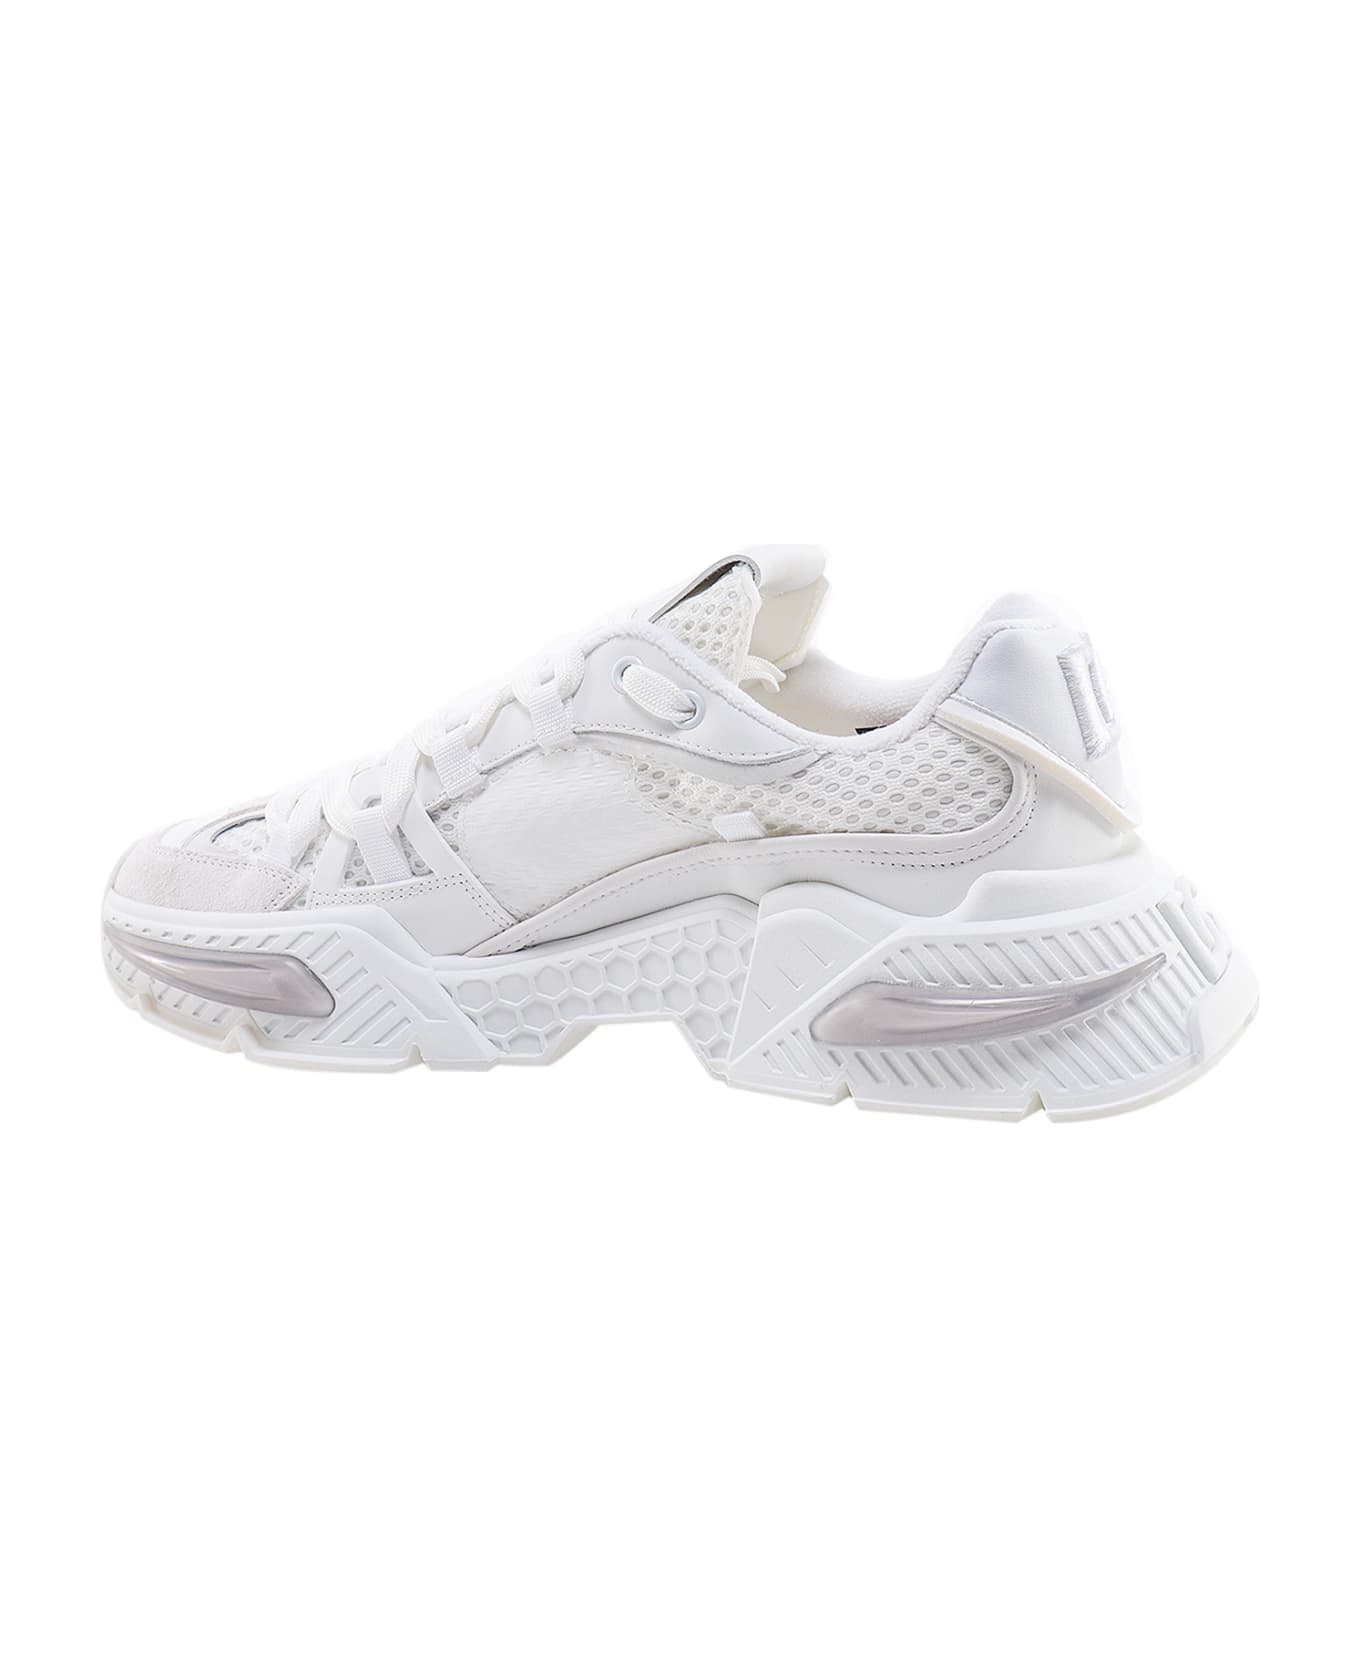 Dolce & Gabbana Airmaster Sneakers - White